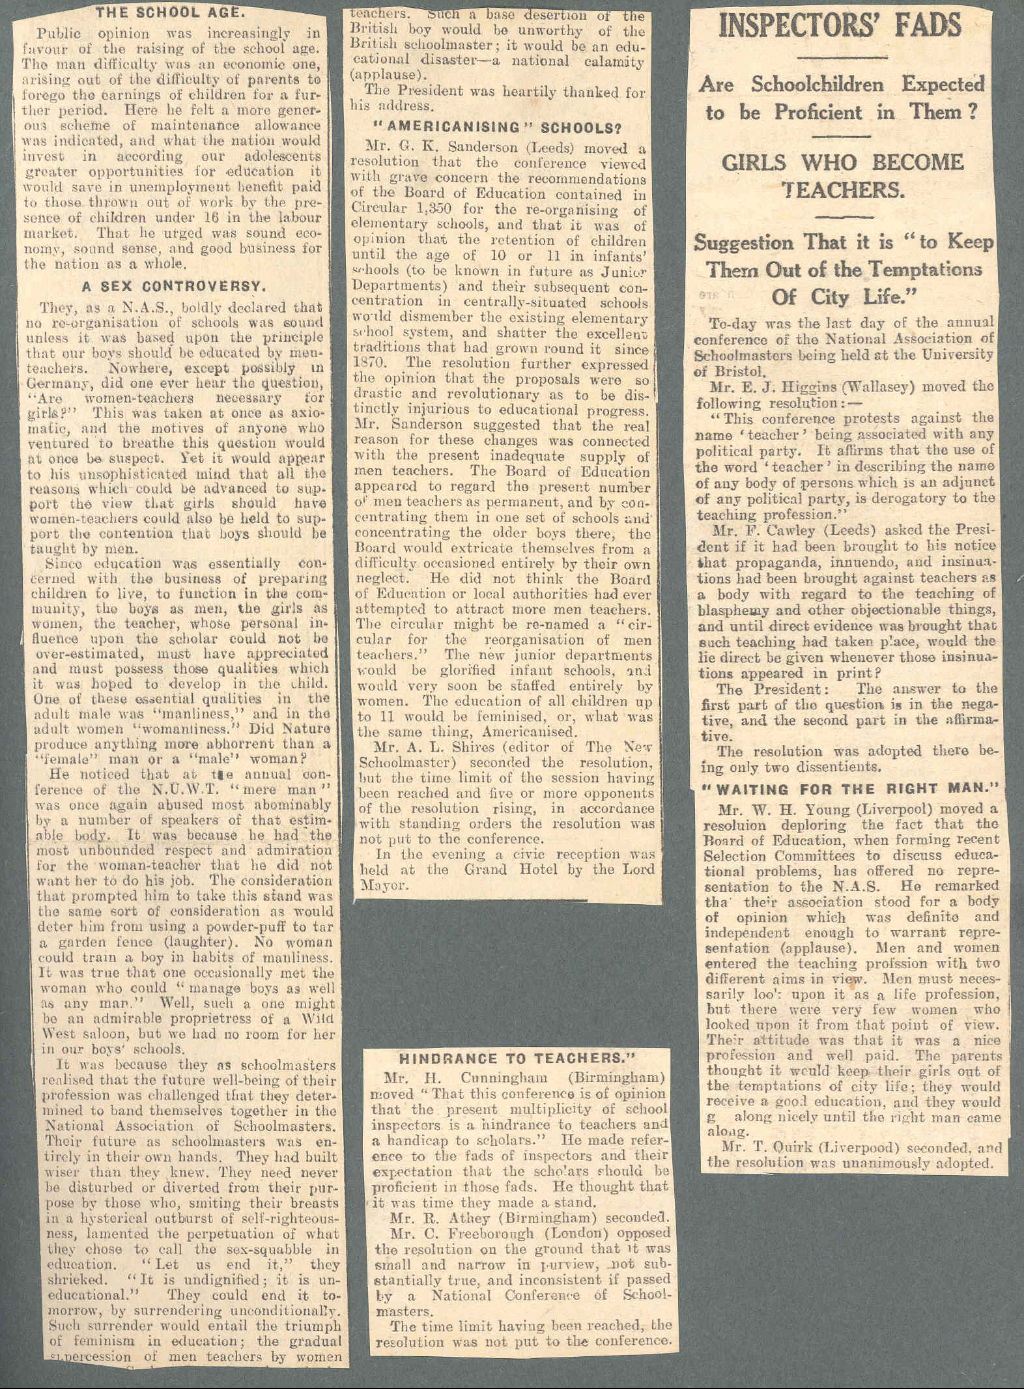 Press cuttings reporting a speech by the President of the National Association of Schoolmasters, 1927